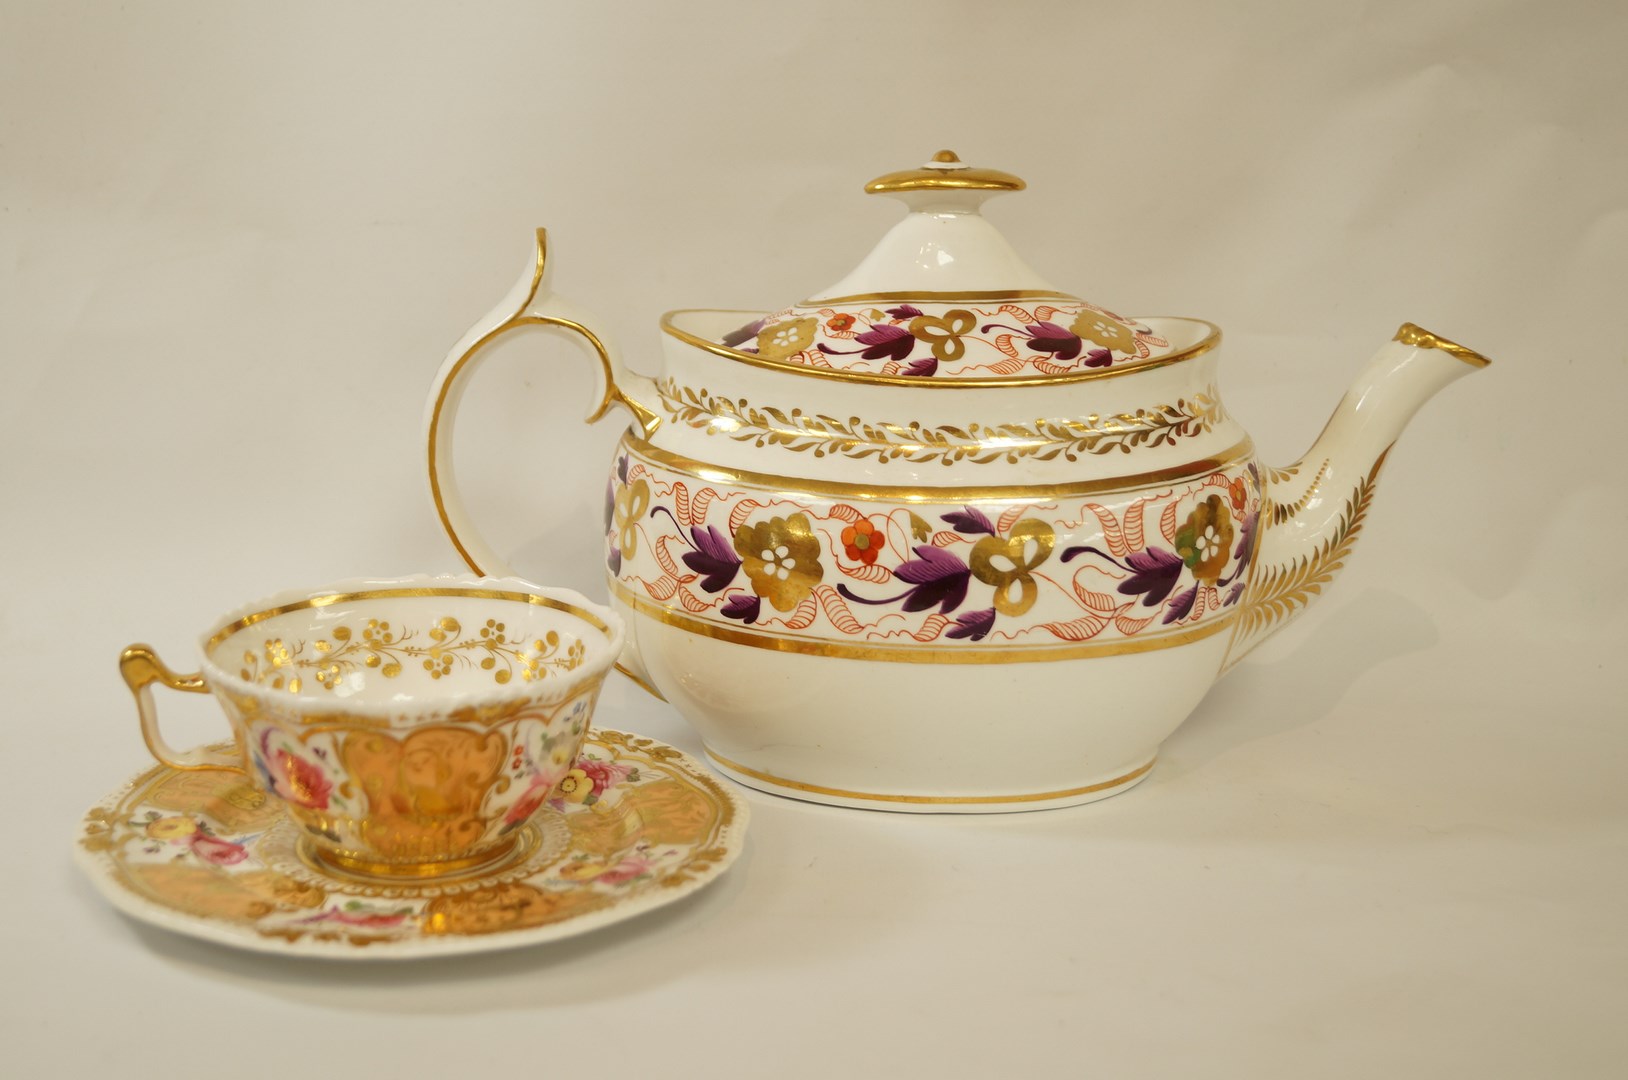 An early 19th century porcelain tea cup and saucer painted with flowers on a peach and gilt ground,